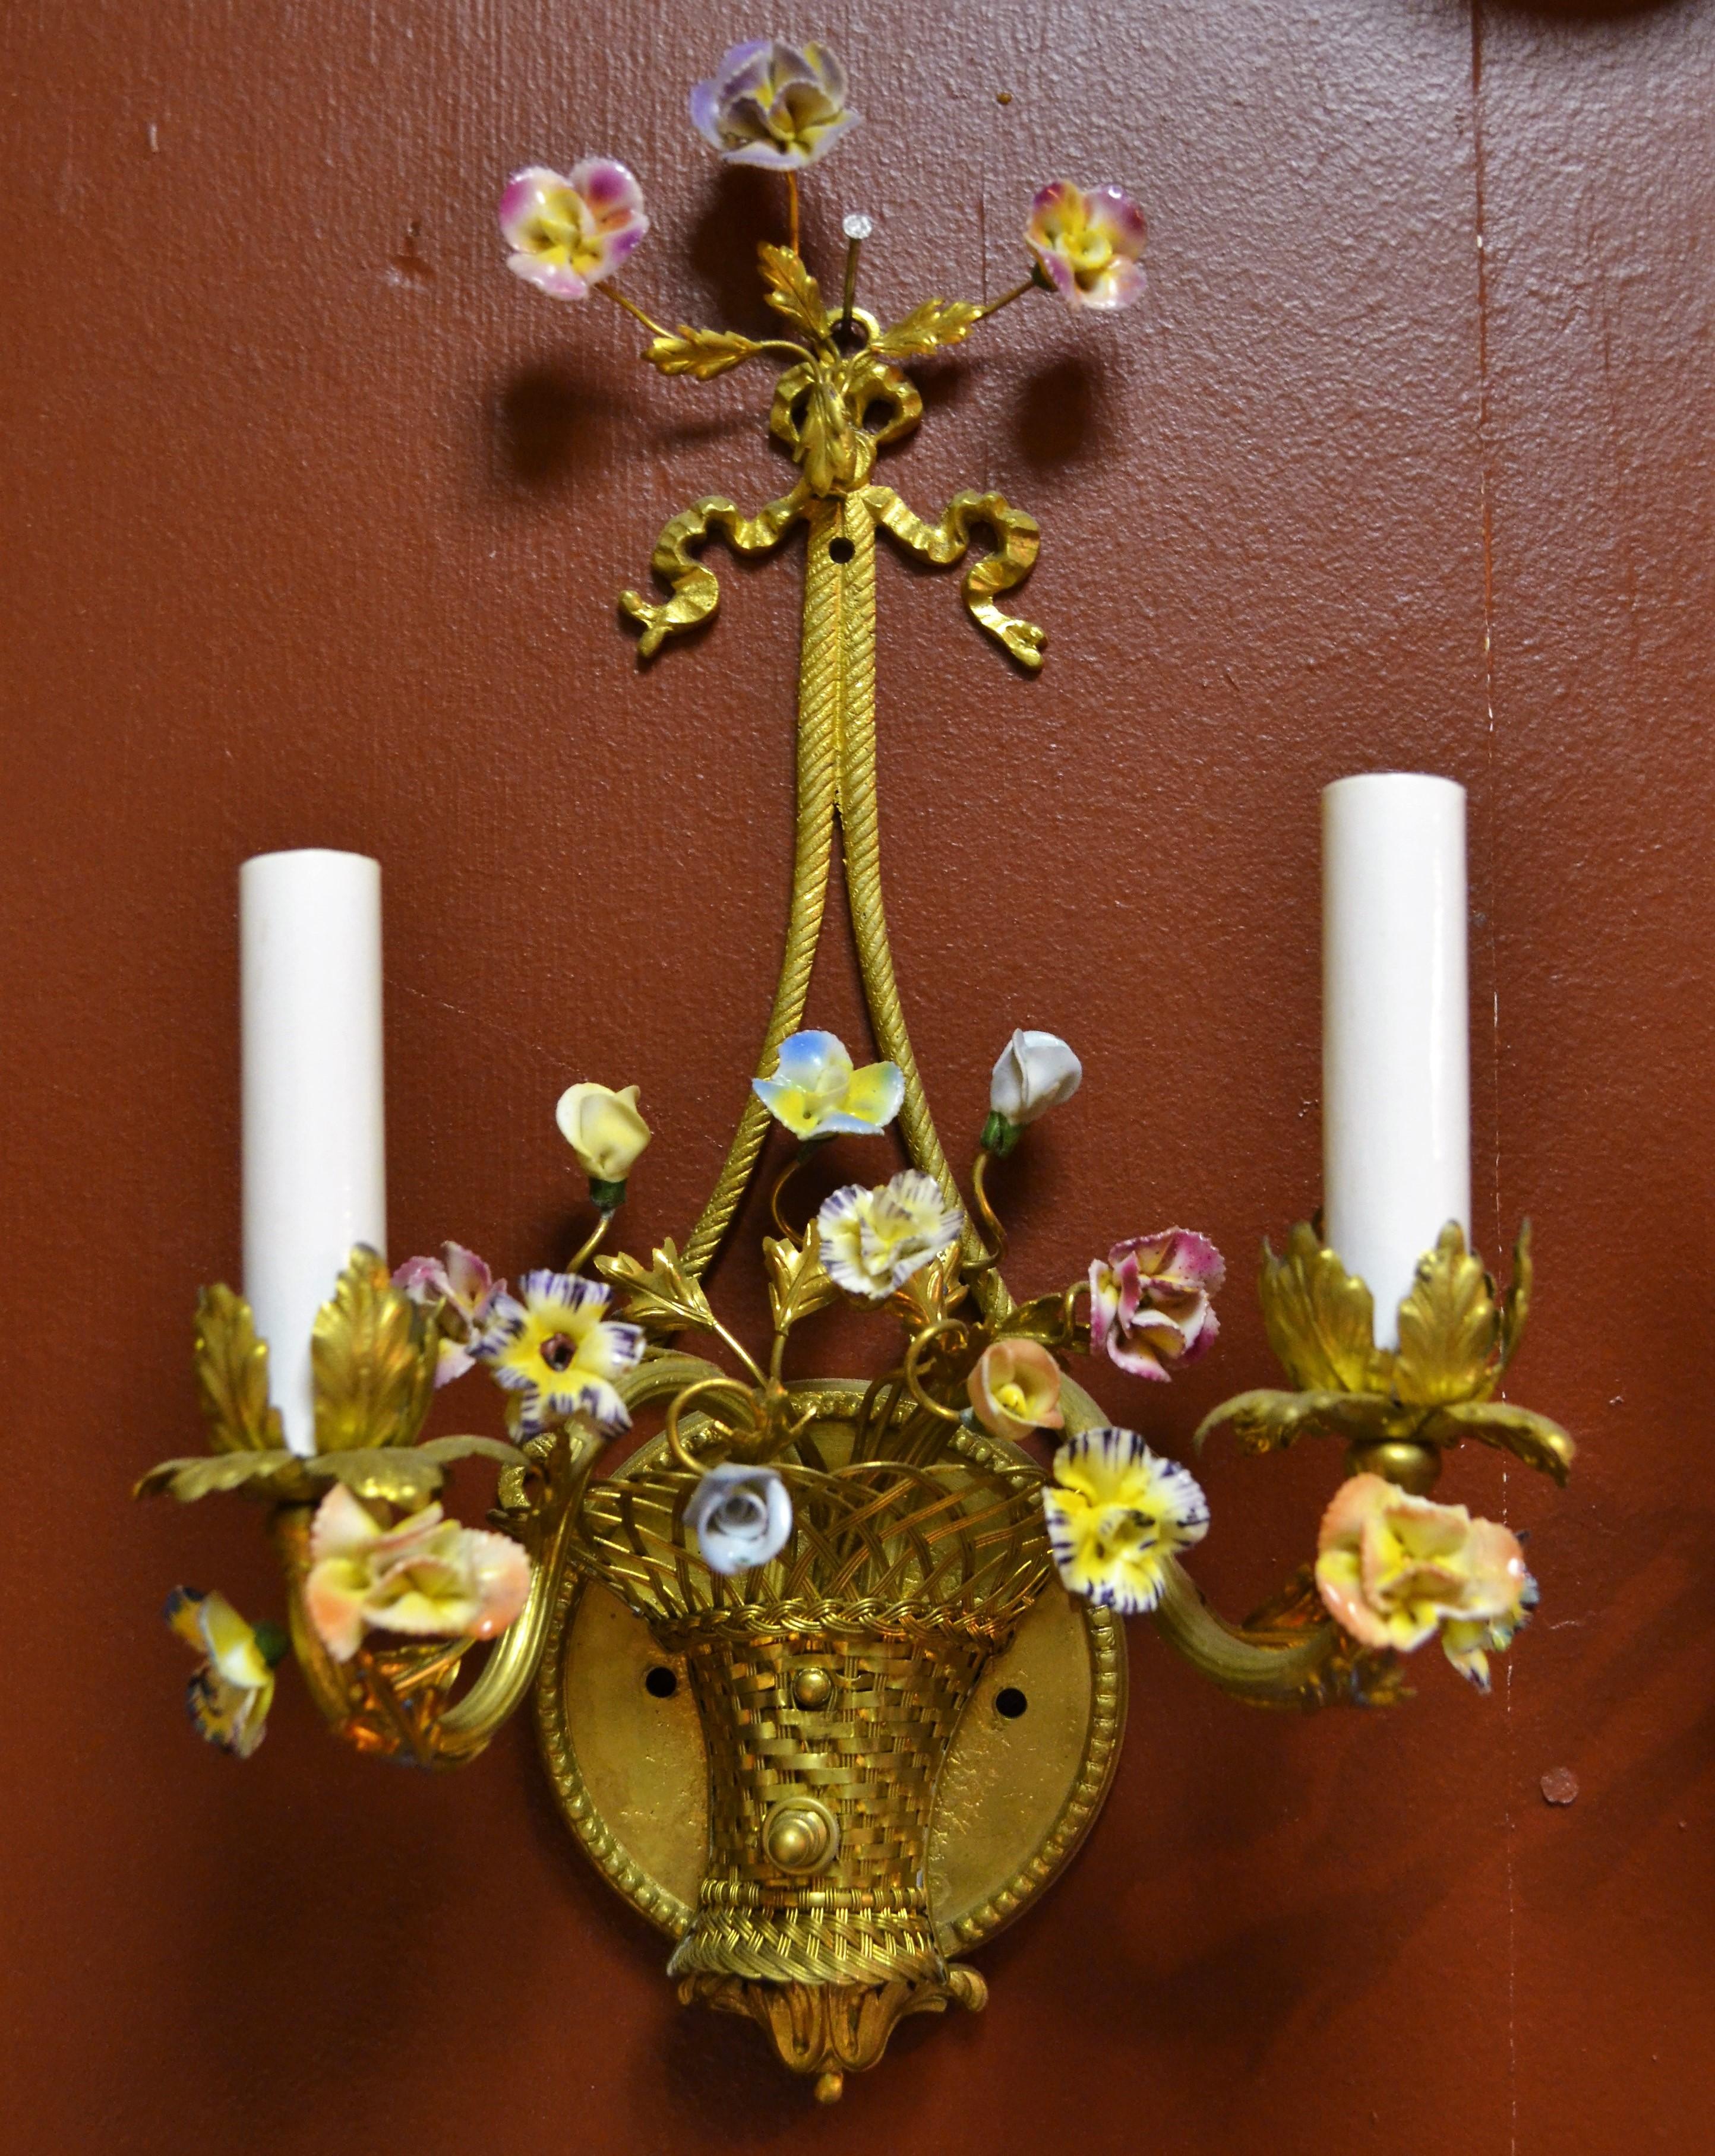 Charming little basket sconces with delicate flowers.